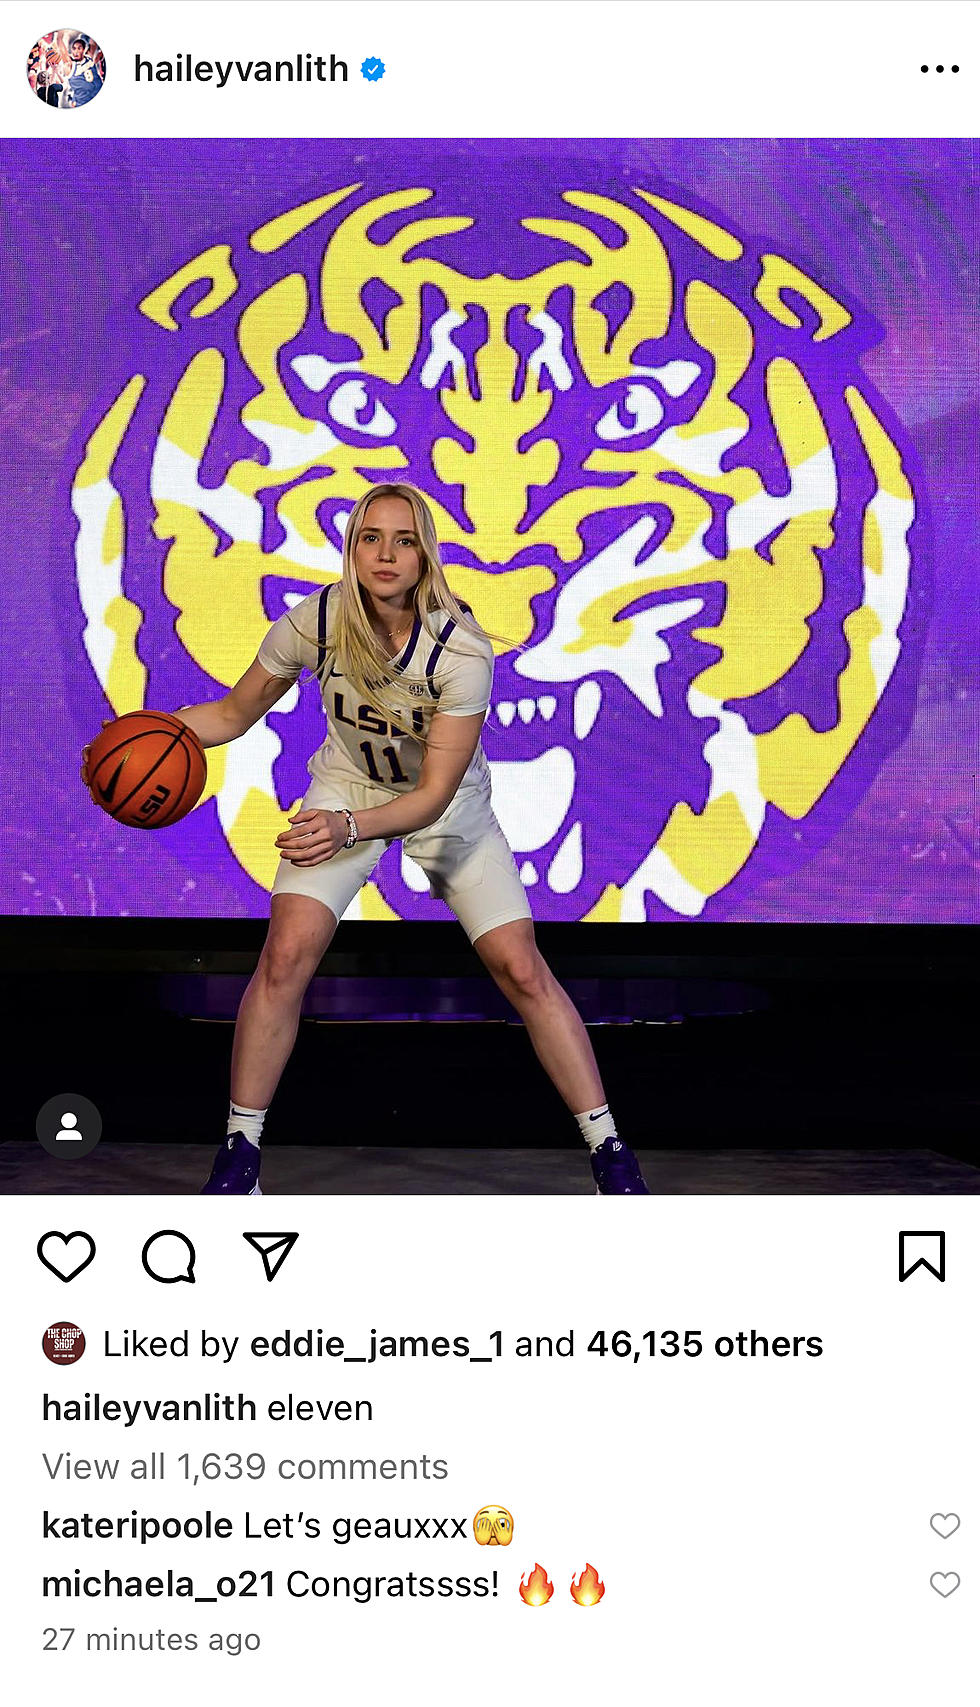 Former Louisville Star Hailey Van Lith Transfers to National Champion LSU